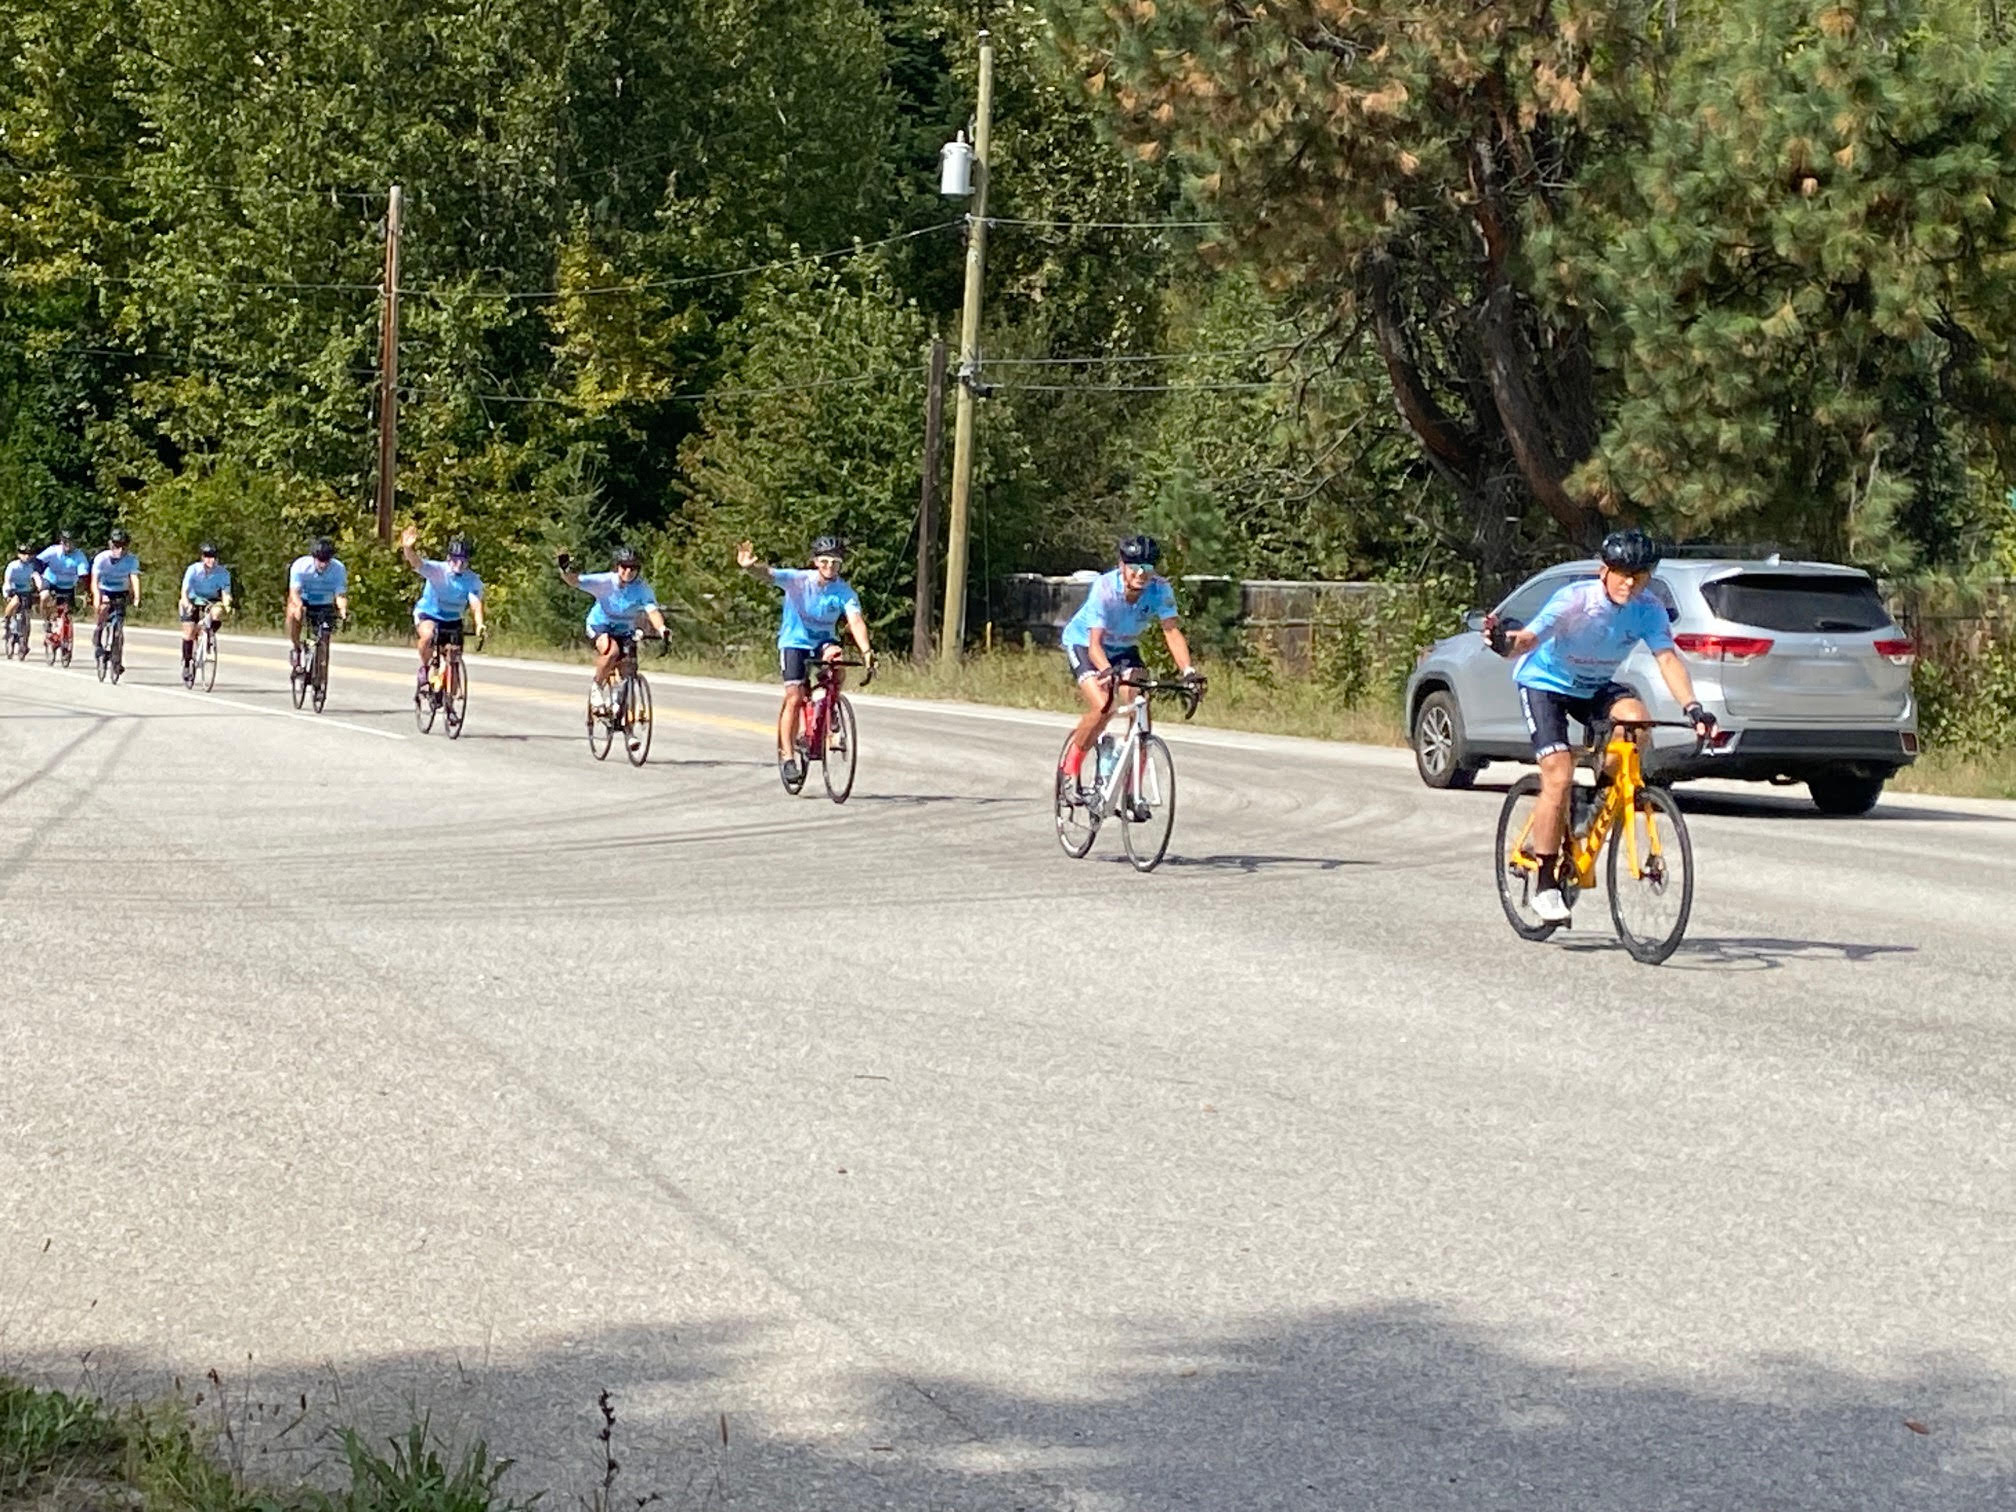 Annual Cops for Kids Ride through southeastern B.C. makes stop in Nelson